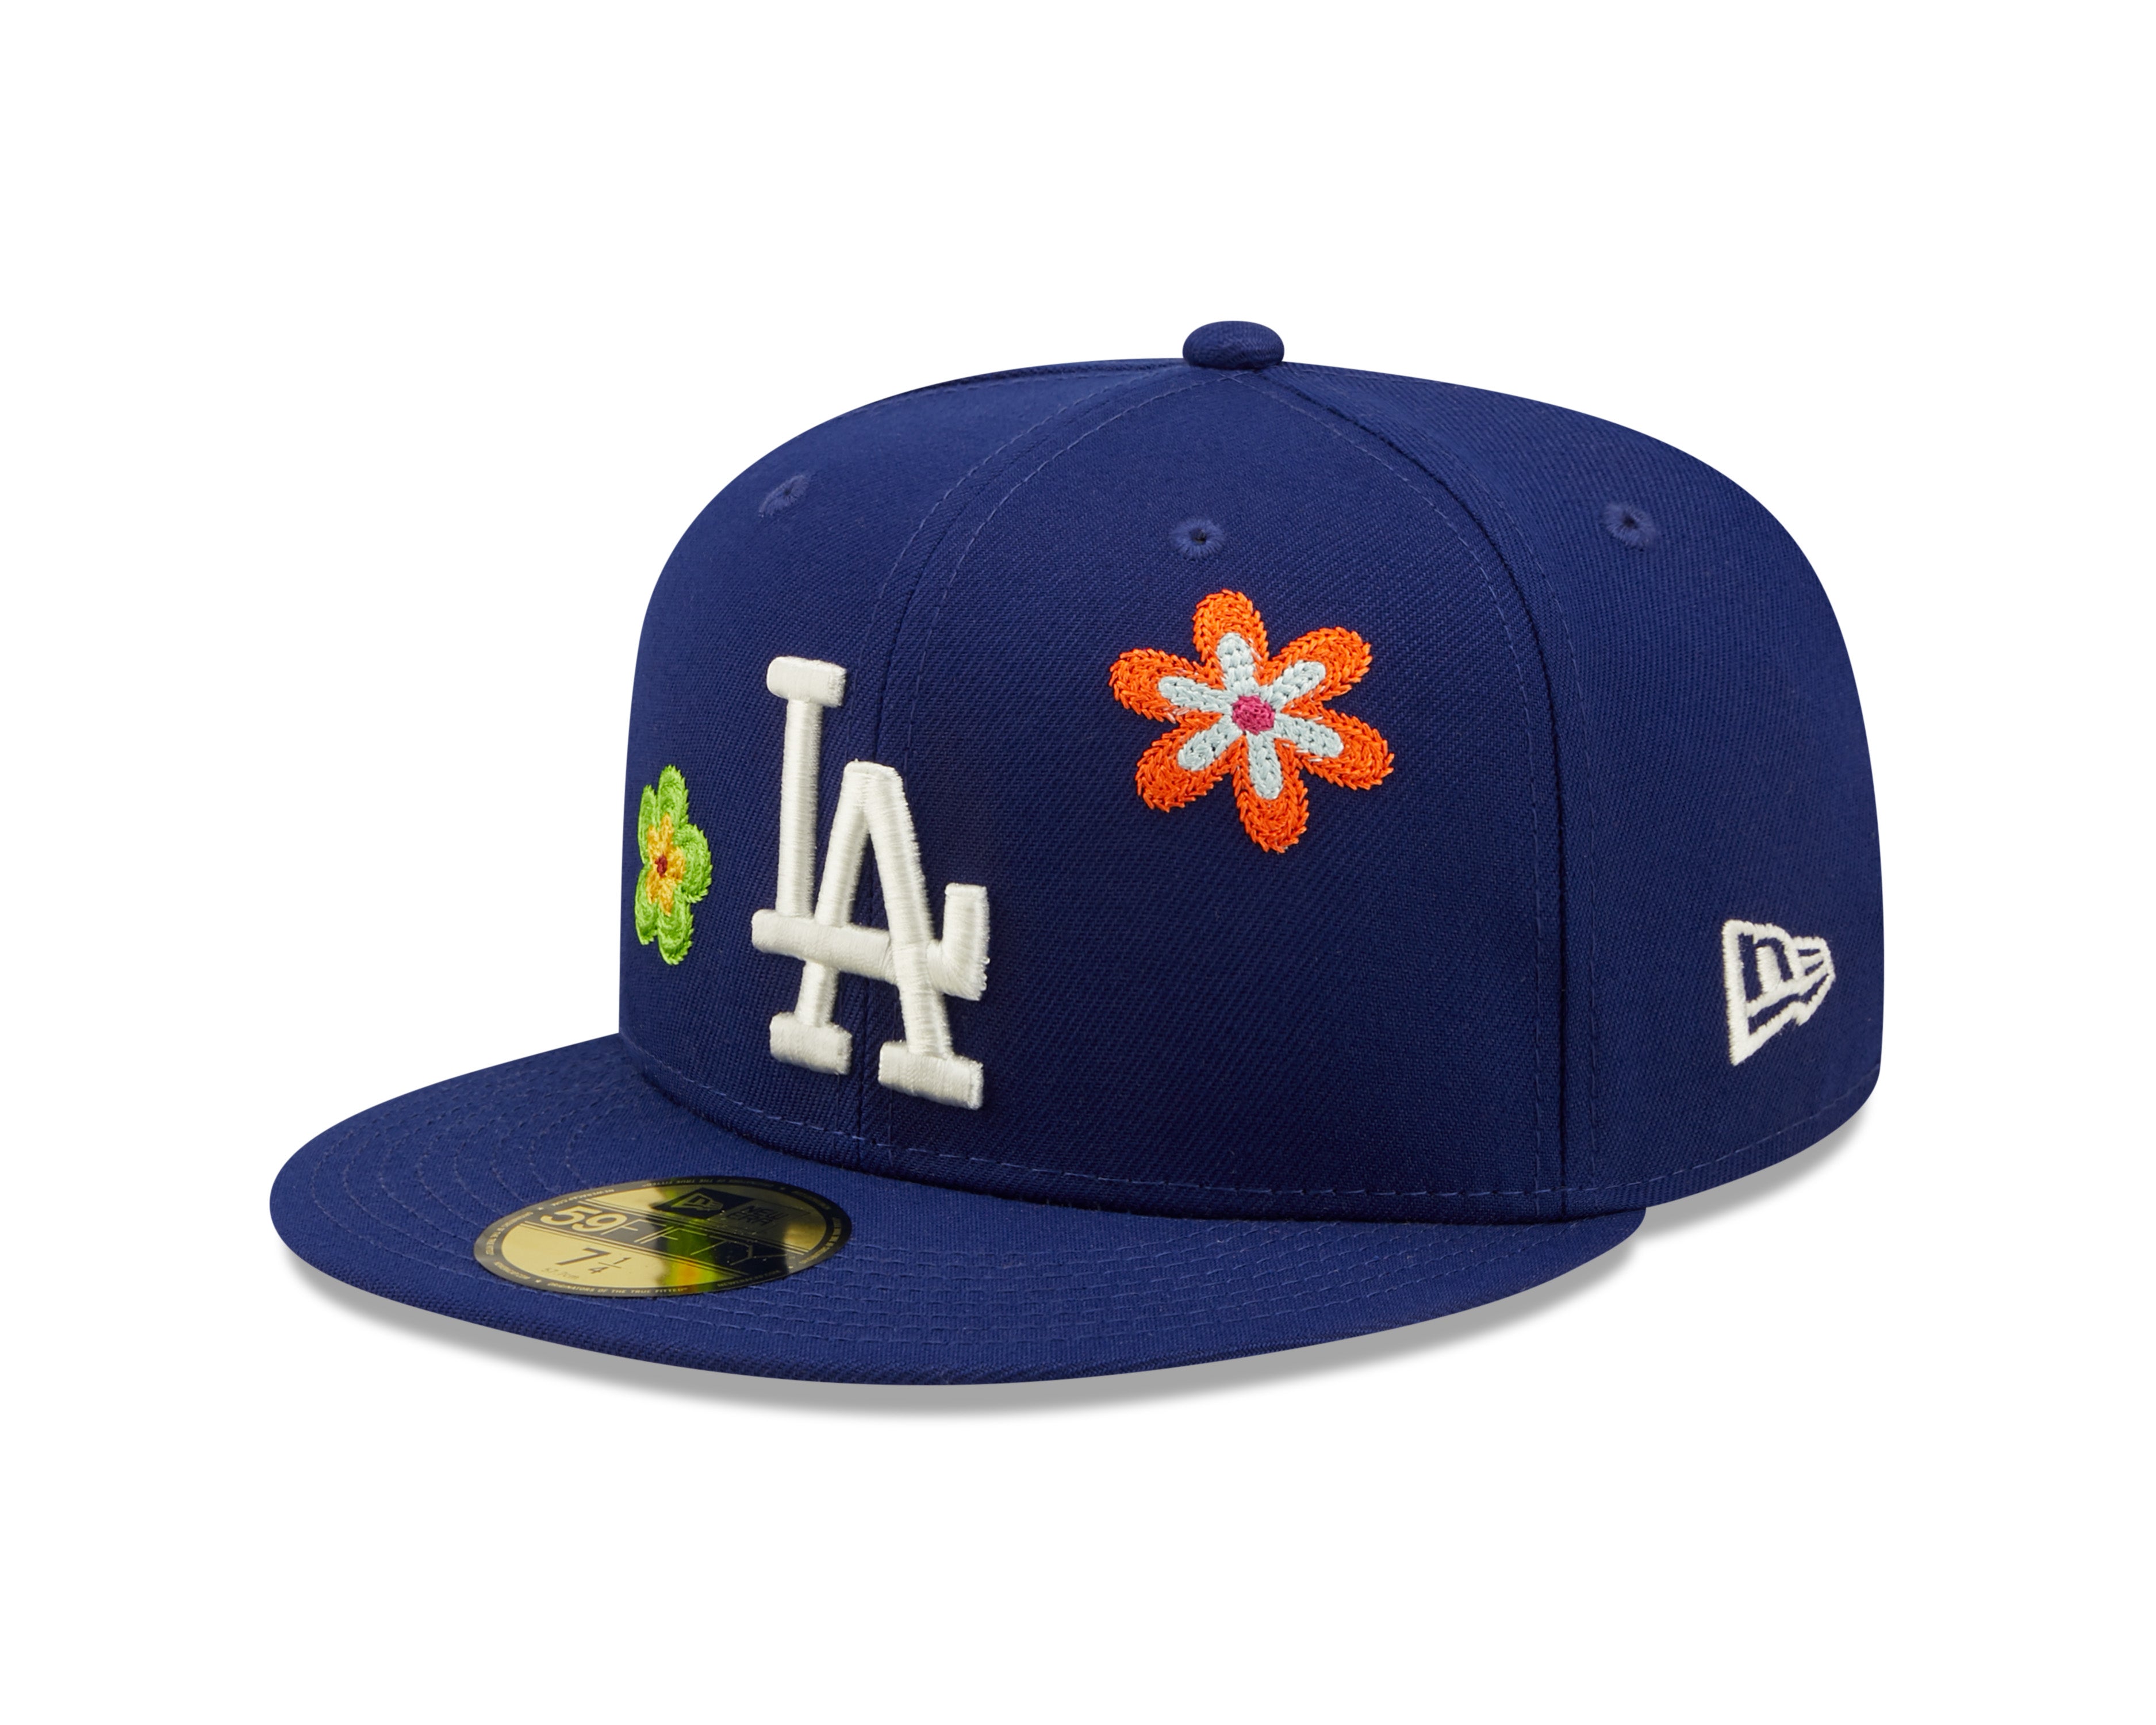 Los Angeles Dodgers 59fifty Fitted Cap MLB Floral - Blue - Headz Up 